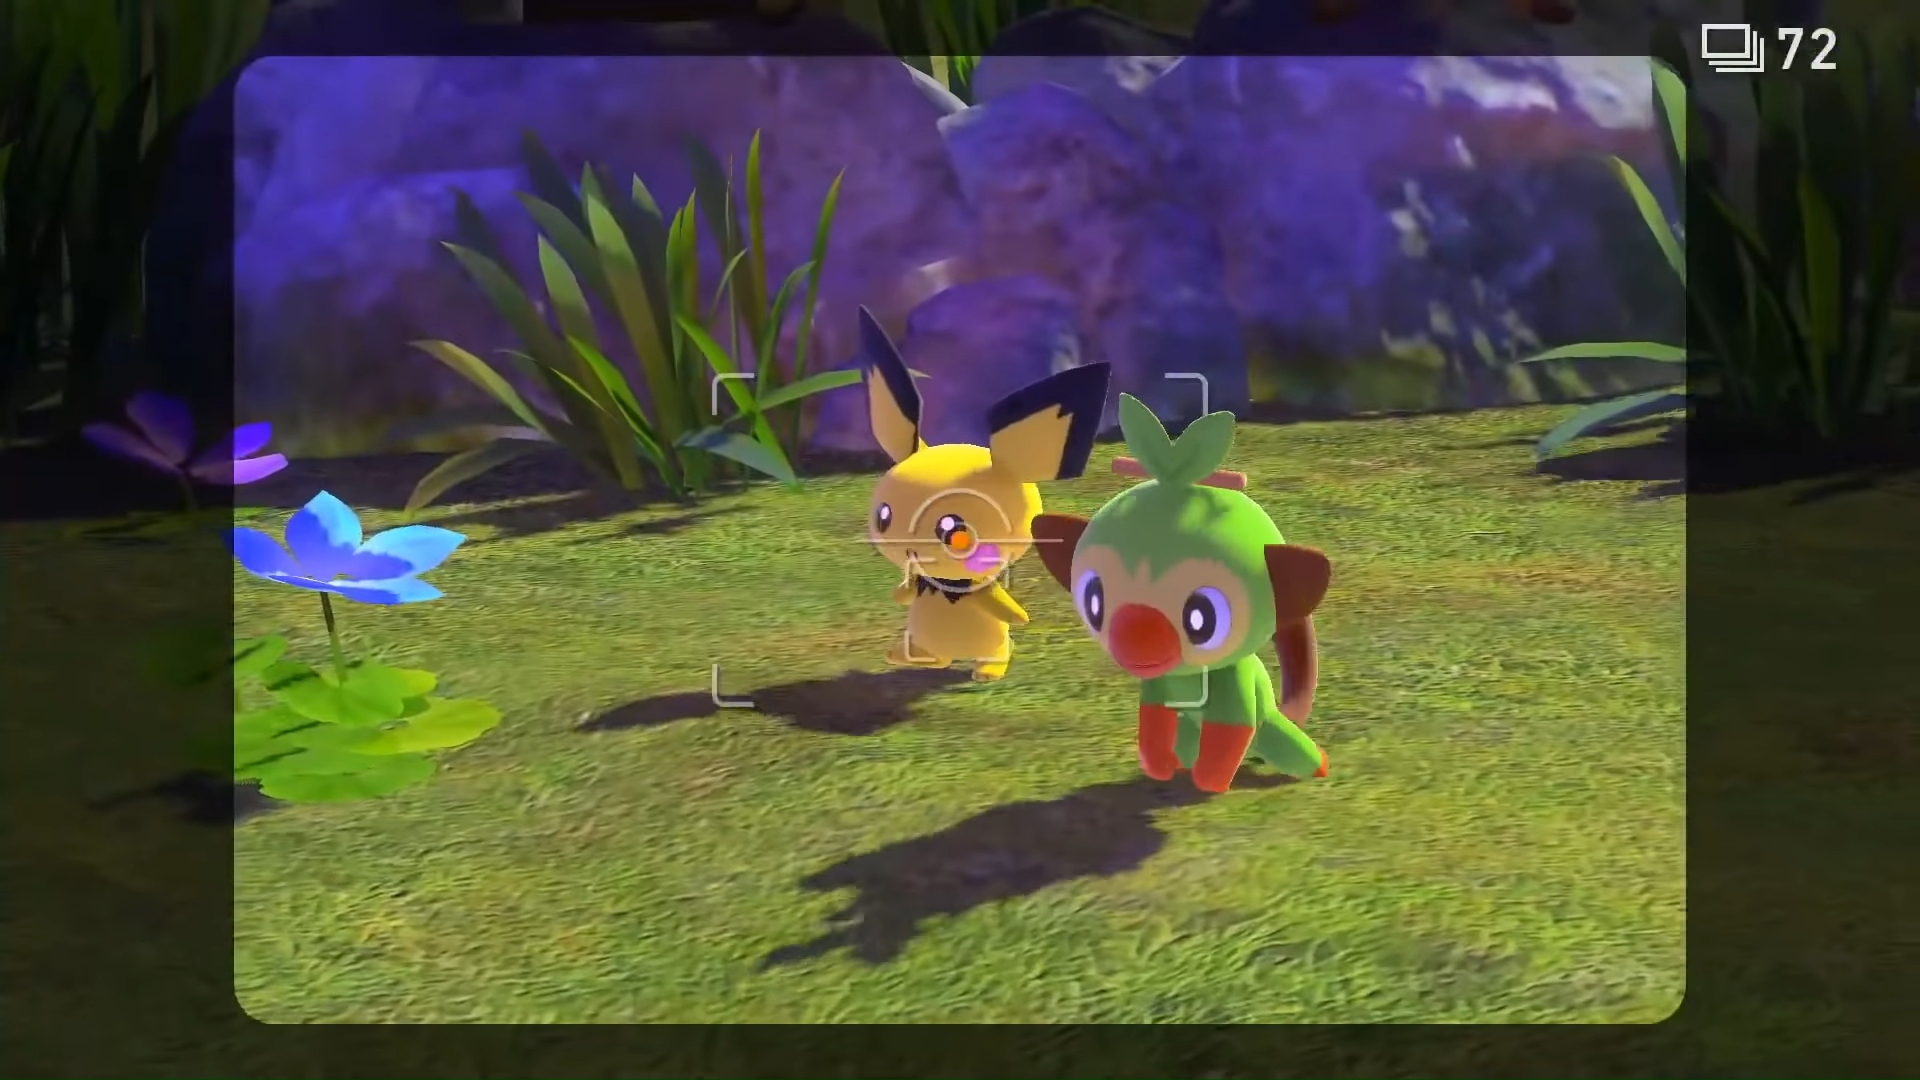 Pokémon Switch games: New Pokémon Snap. Image shows a Pichu and Grookey about to be photographed.